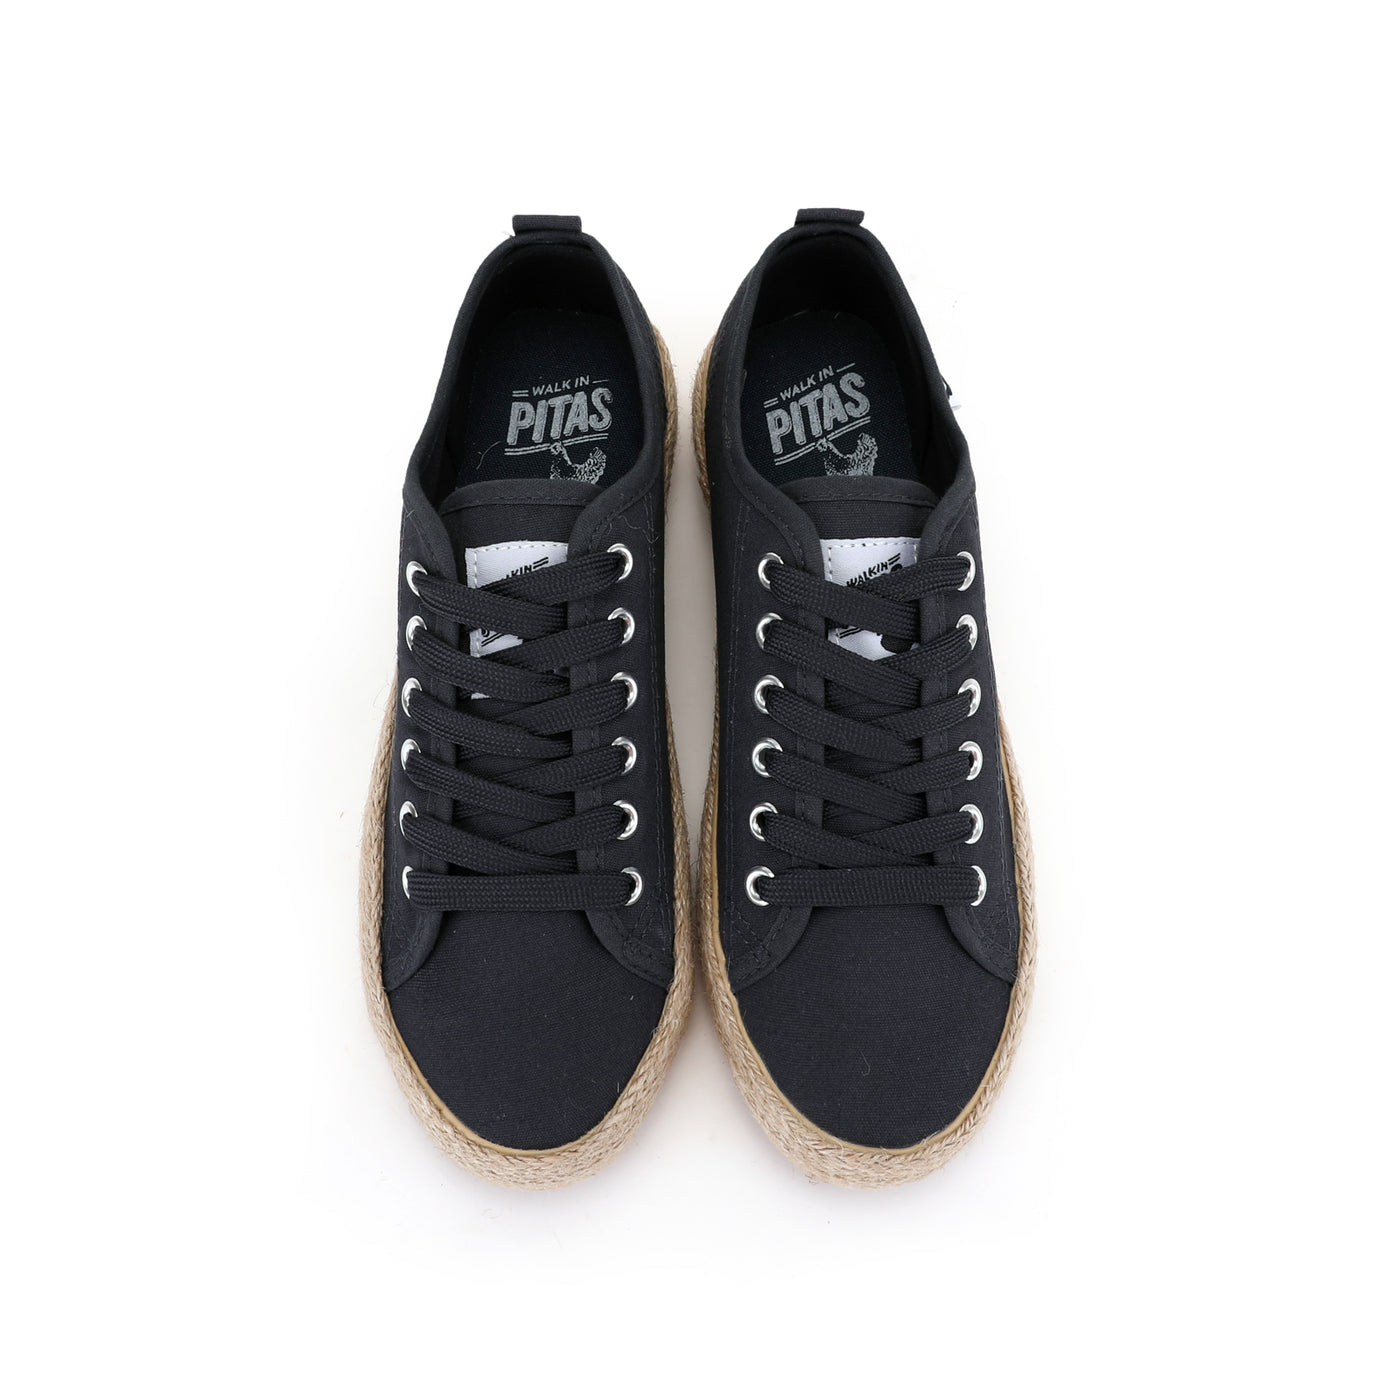 Navy blue canvas lace-up espadrille sneakers